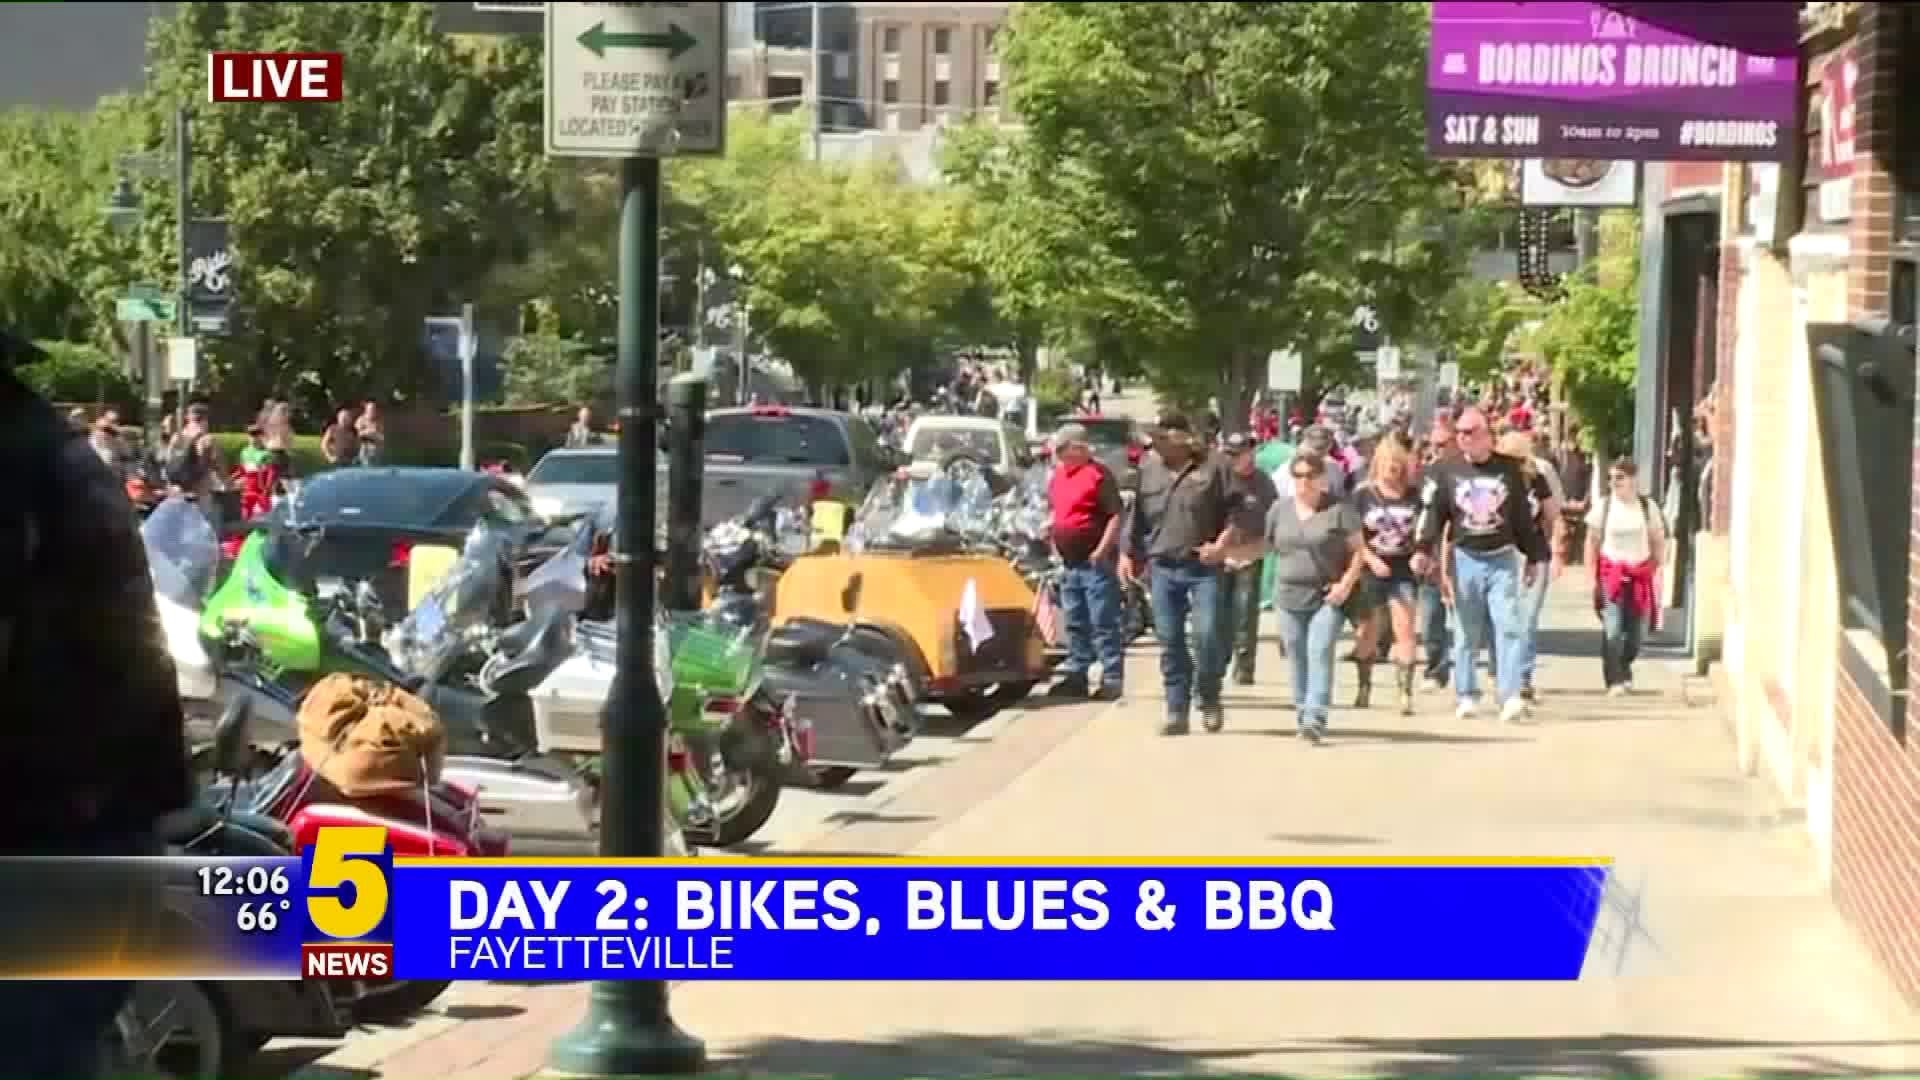 Bikes, Blues and BBQ - Day 2